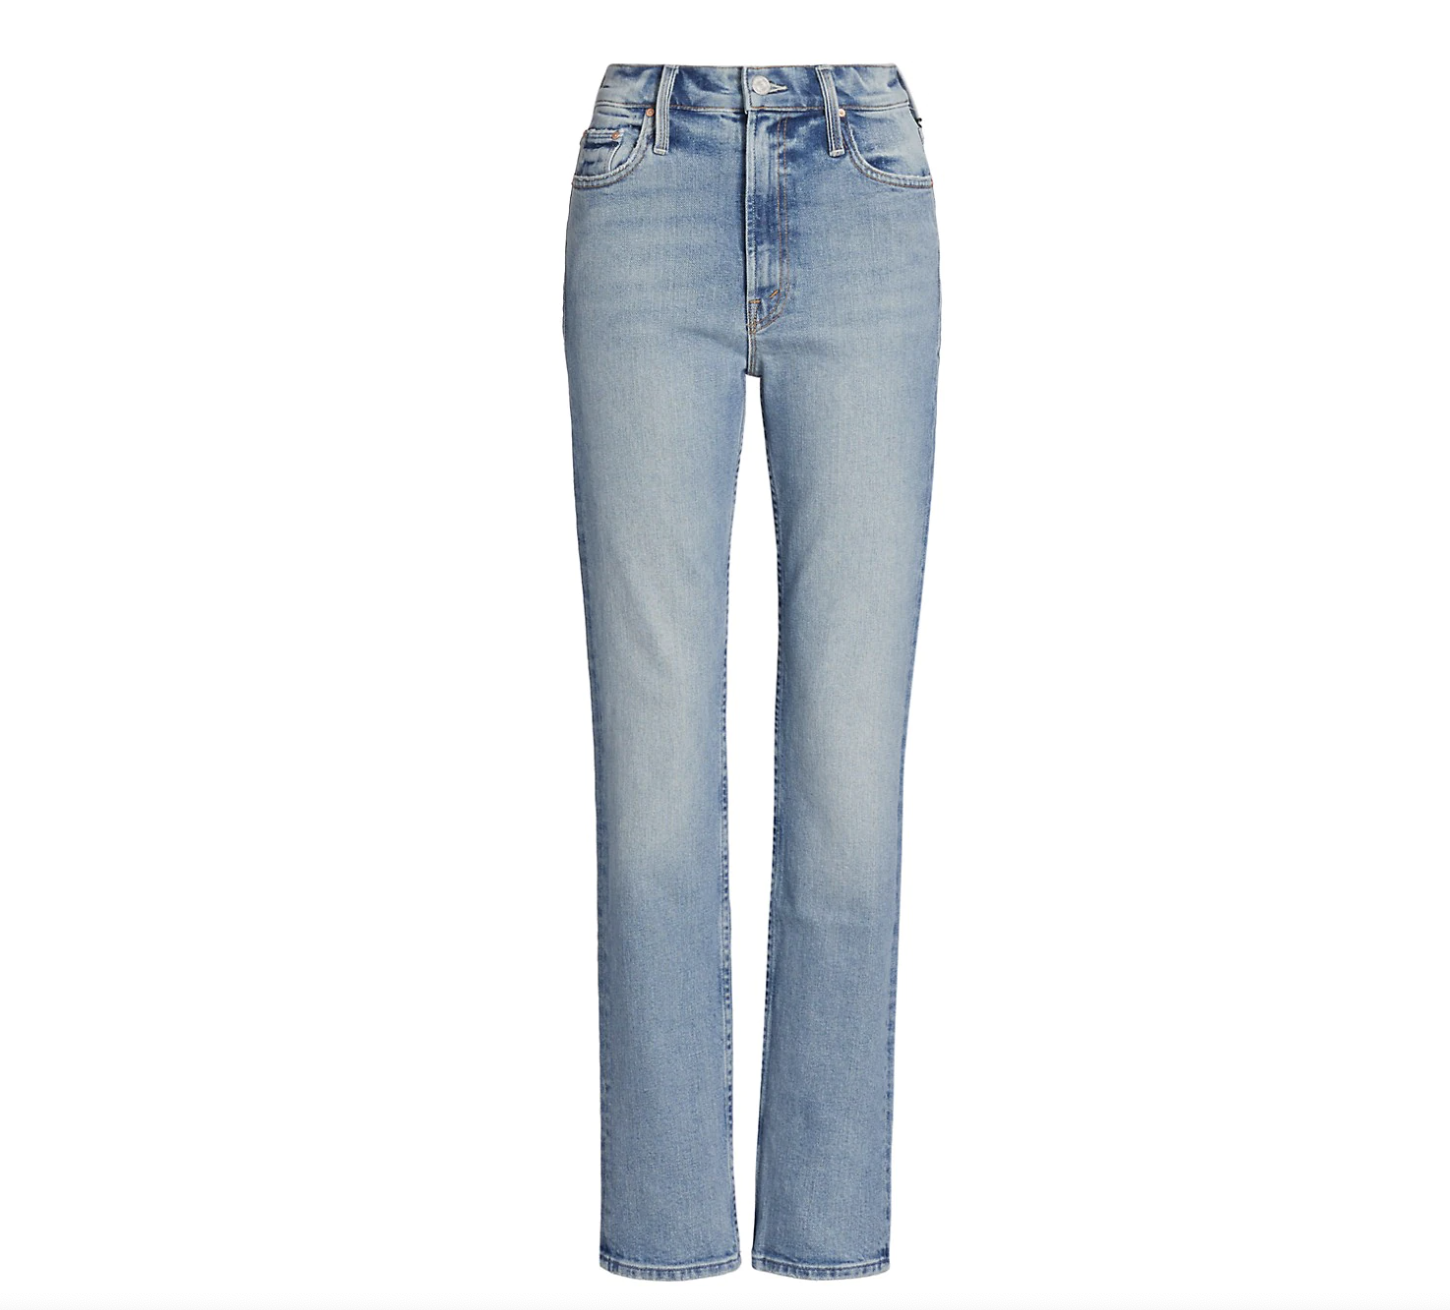 Rider High-Rise Straight Jeans